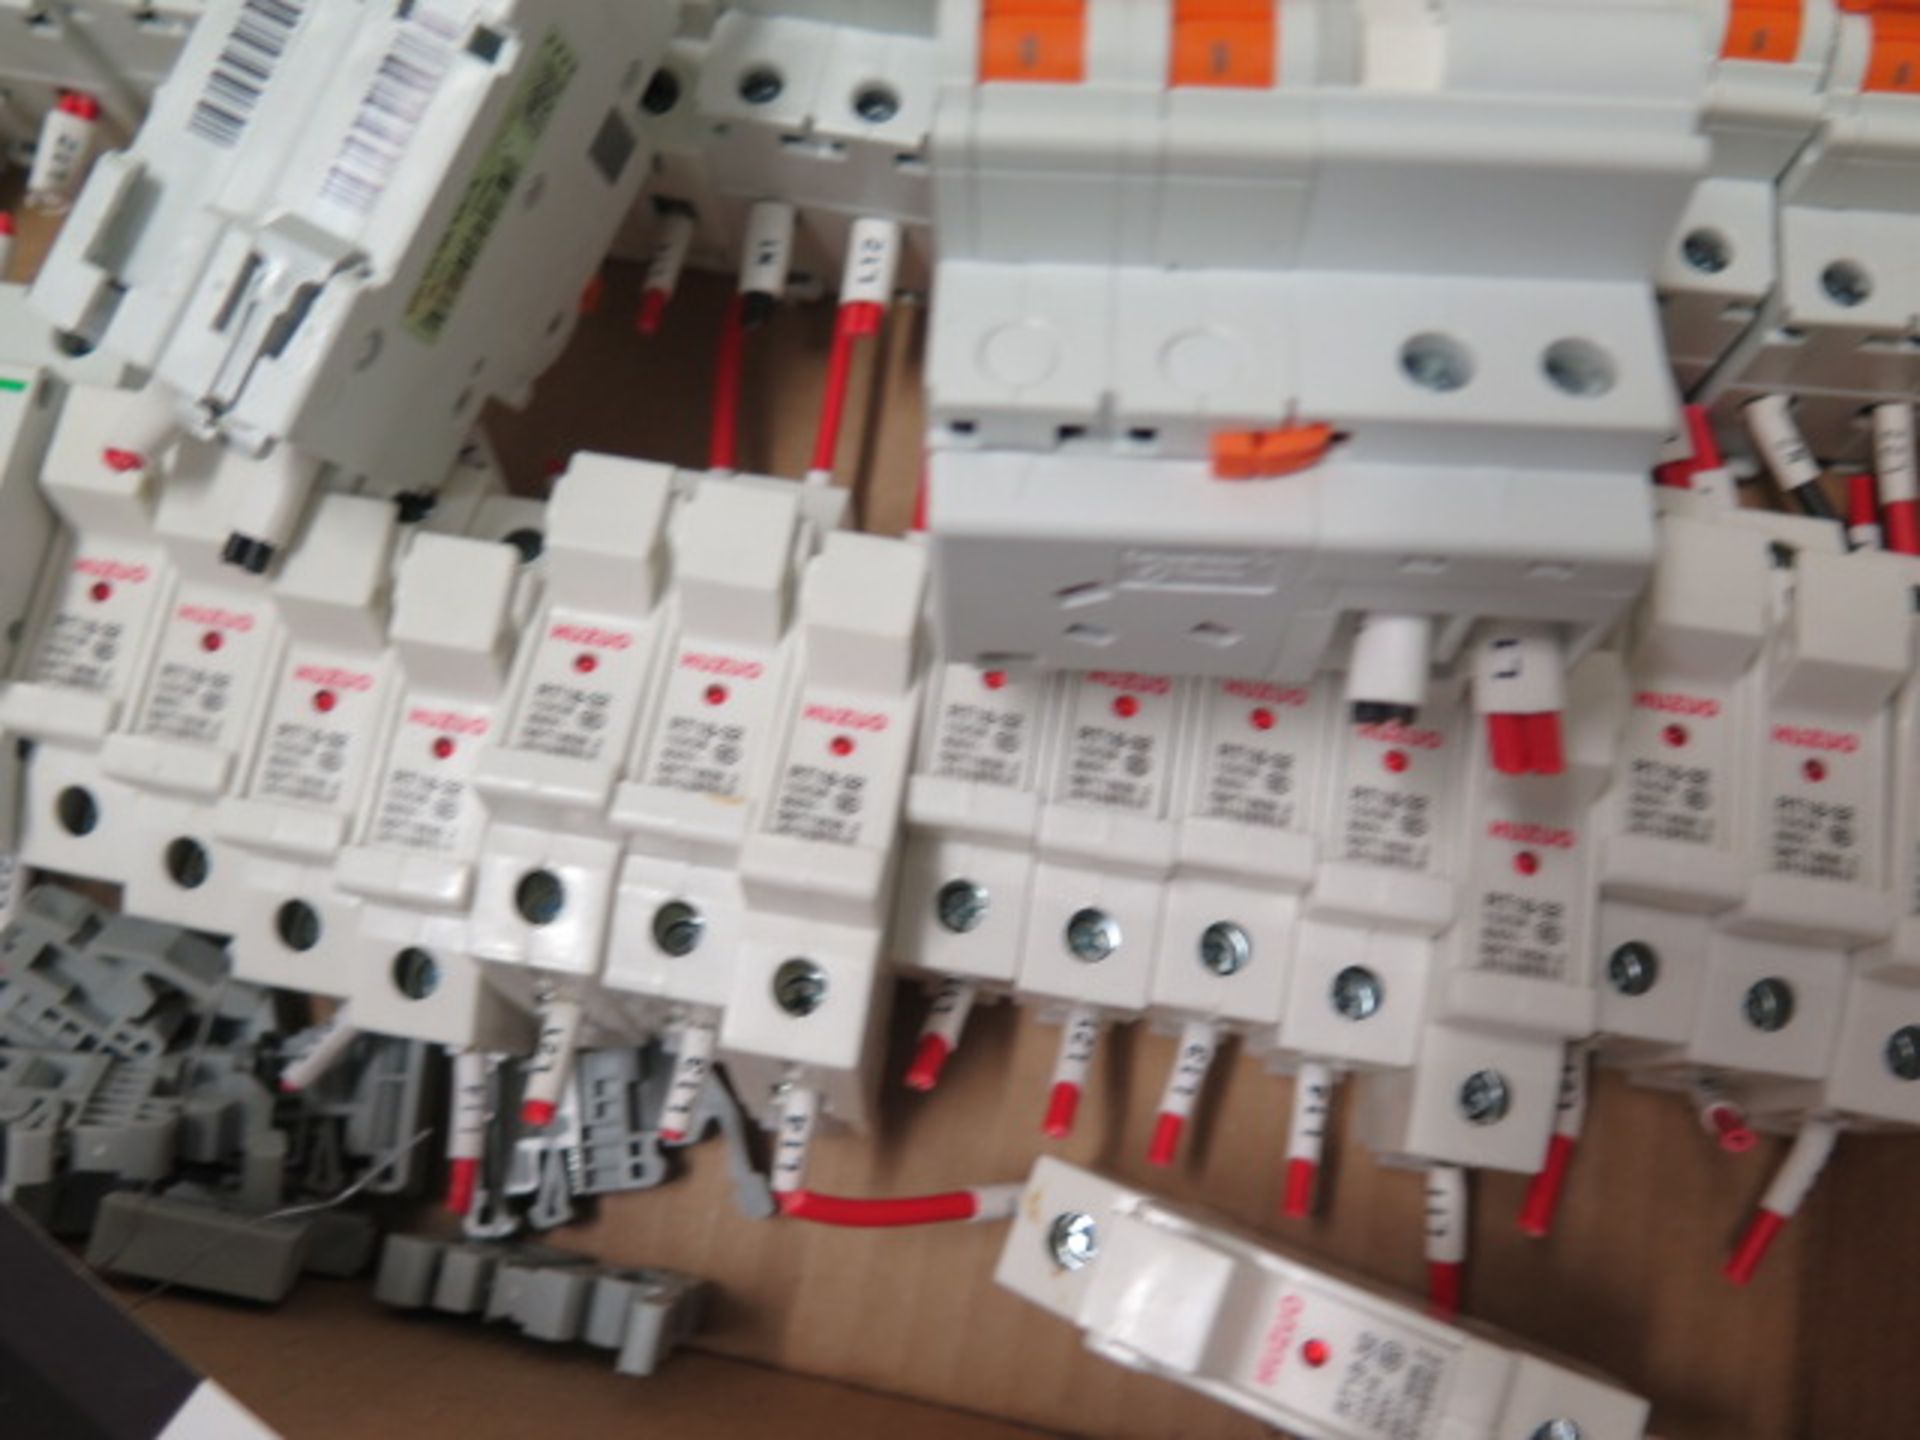 Schneider Easy8 C25 EA9AN2C25 Circuit Breakers (12) and Huzuo RT18-32 10X38 500V G3/T13539.2 Fuse Bl - Image 5 of 6